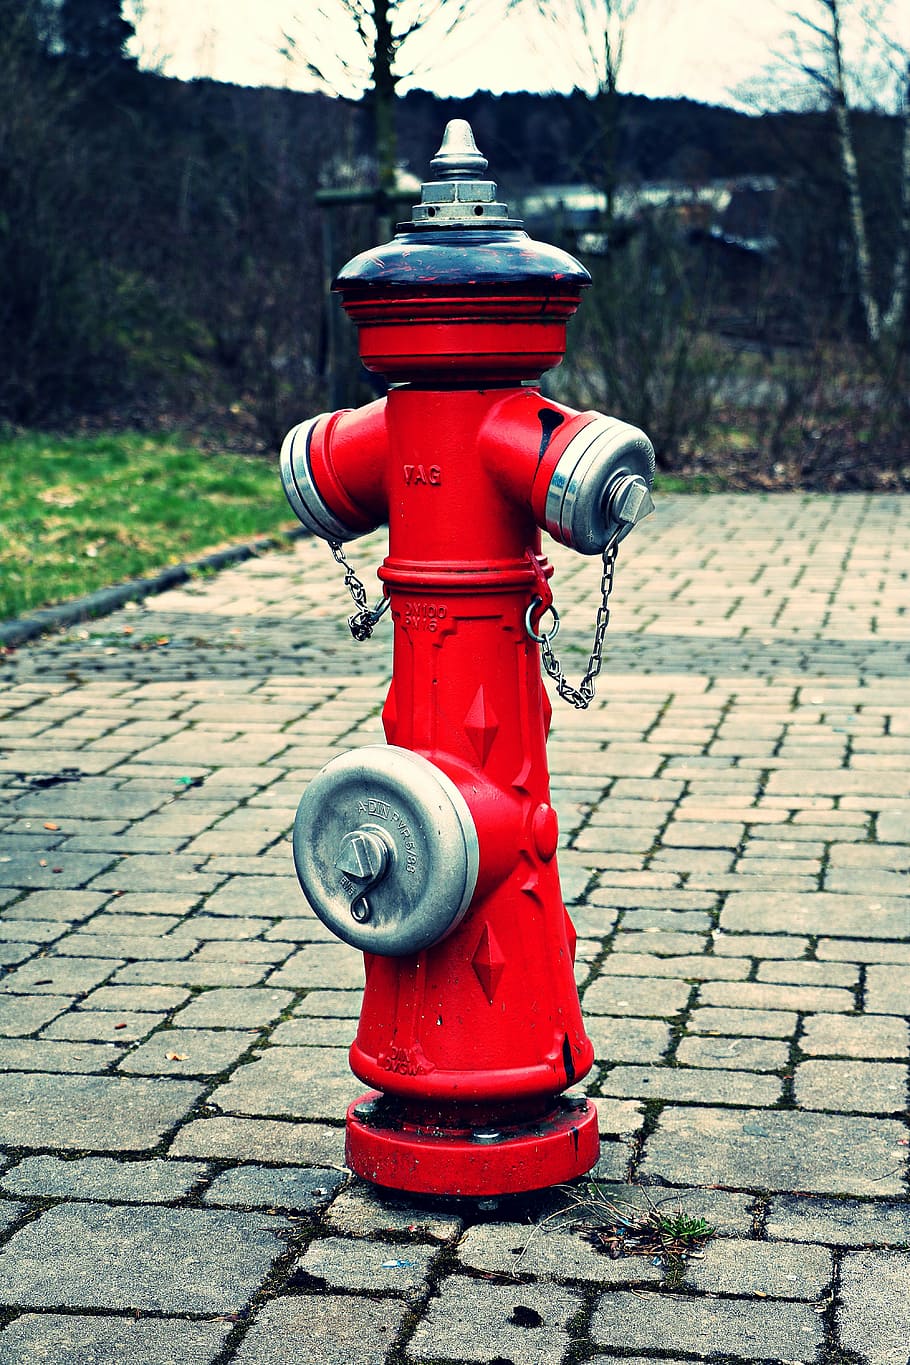 hydrant, fire, water hydrant, red, metal, water, fire fighting water, water utilities, fire fighting water supply, water abstraction